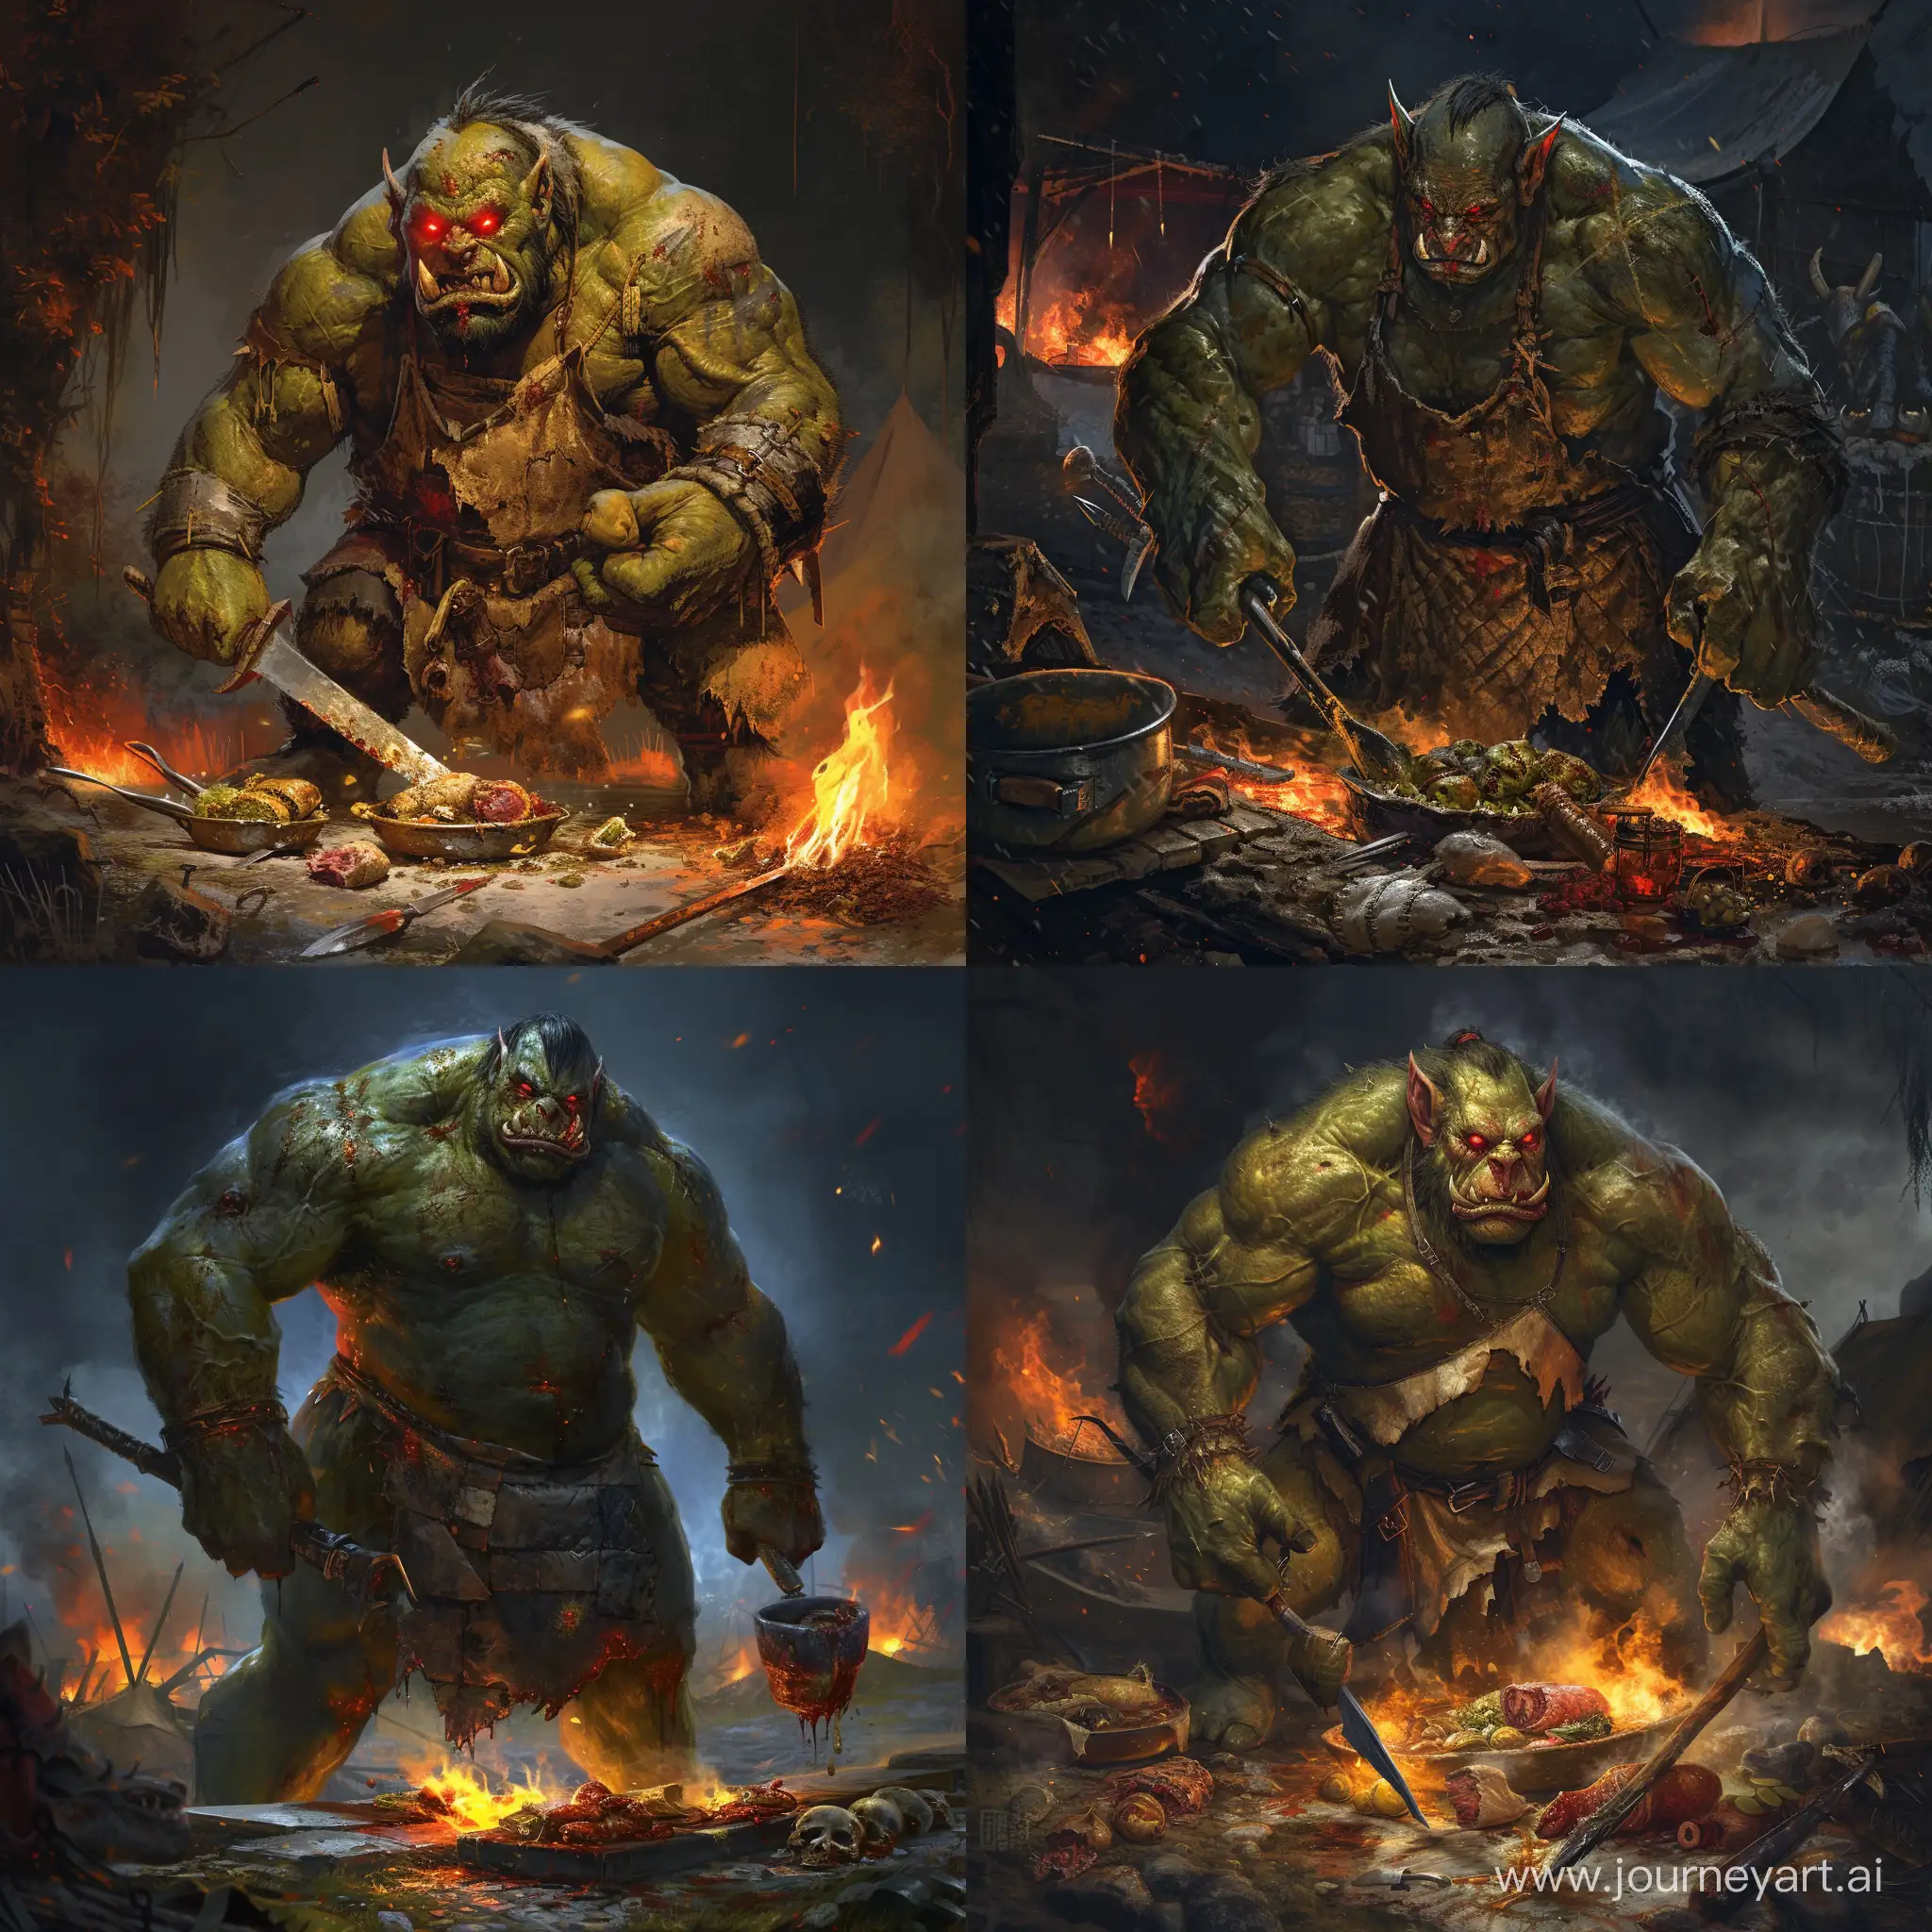 an orc who is Massive and muscular with green, rough-hewn skin, Glowing red eyes burn with primal ferocity, Wears a patchwork apron made from the hides of slain beasts, cooking hearty meals fit for a warband like grotesque foods, cooking in a rugged campsite on the edge of a war-torn battlefield, where the fires of conflict still smolder amidst the chaos., 1970's grimdark fantasy, dark lighting, detailed, gritty